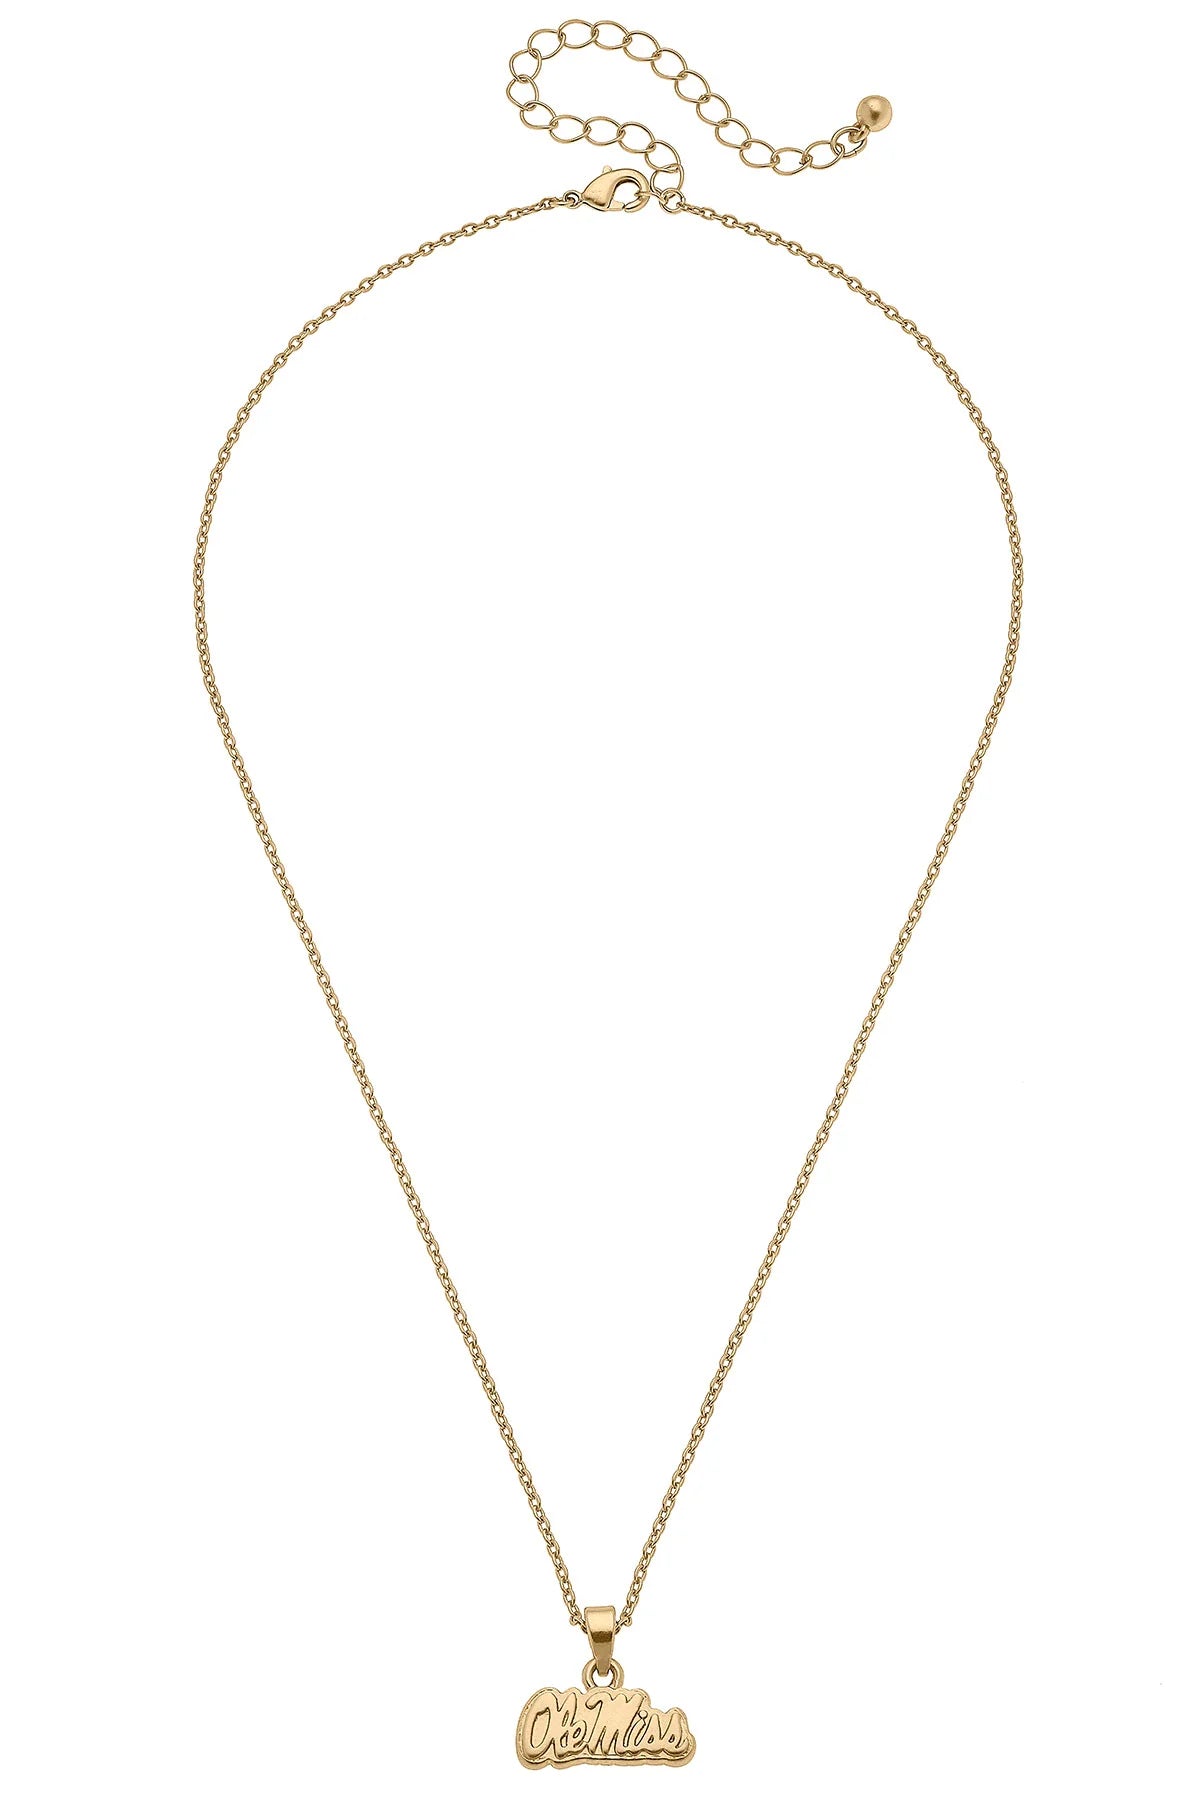 Gold Ole Miss Necklace